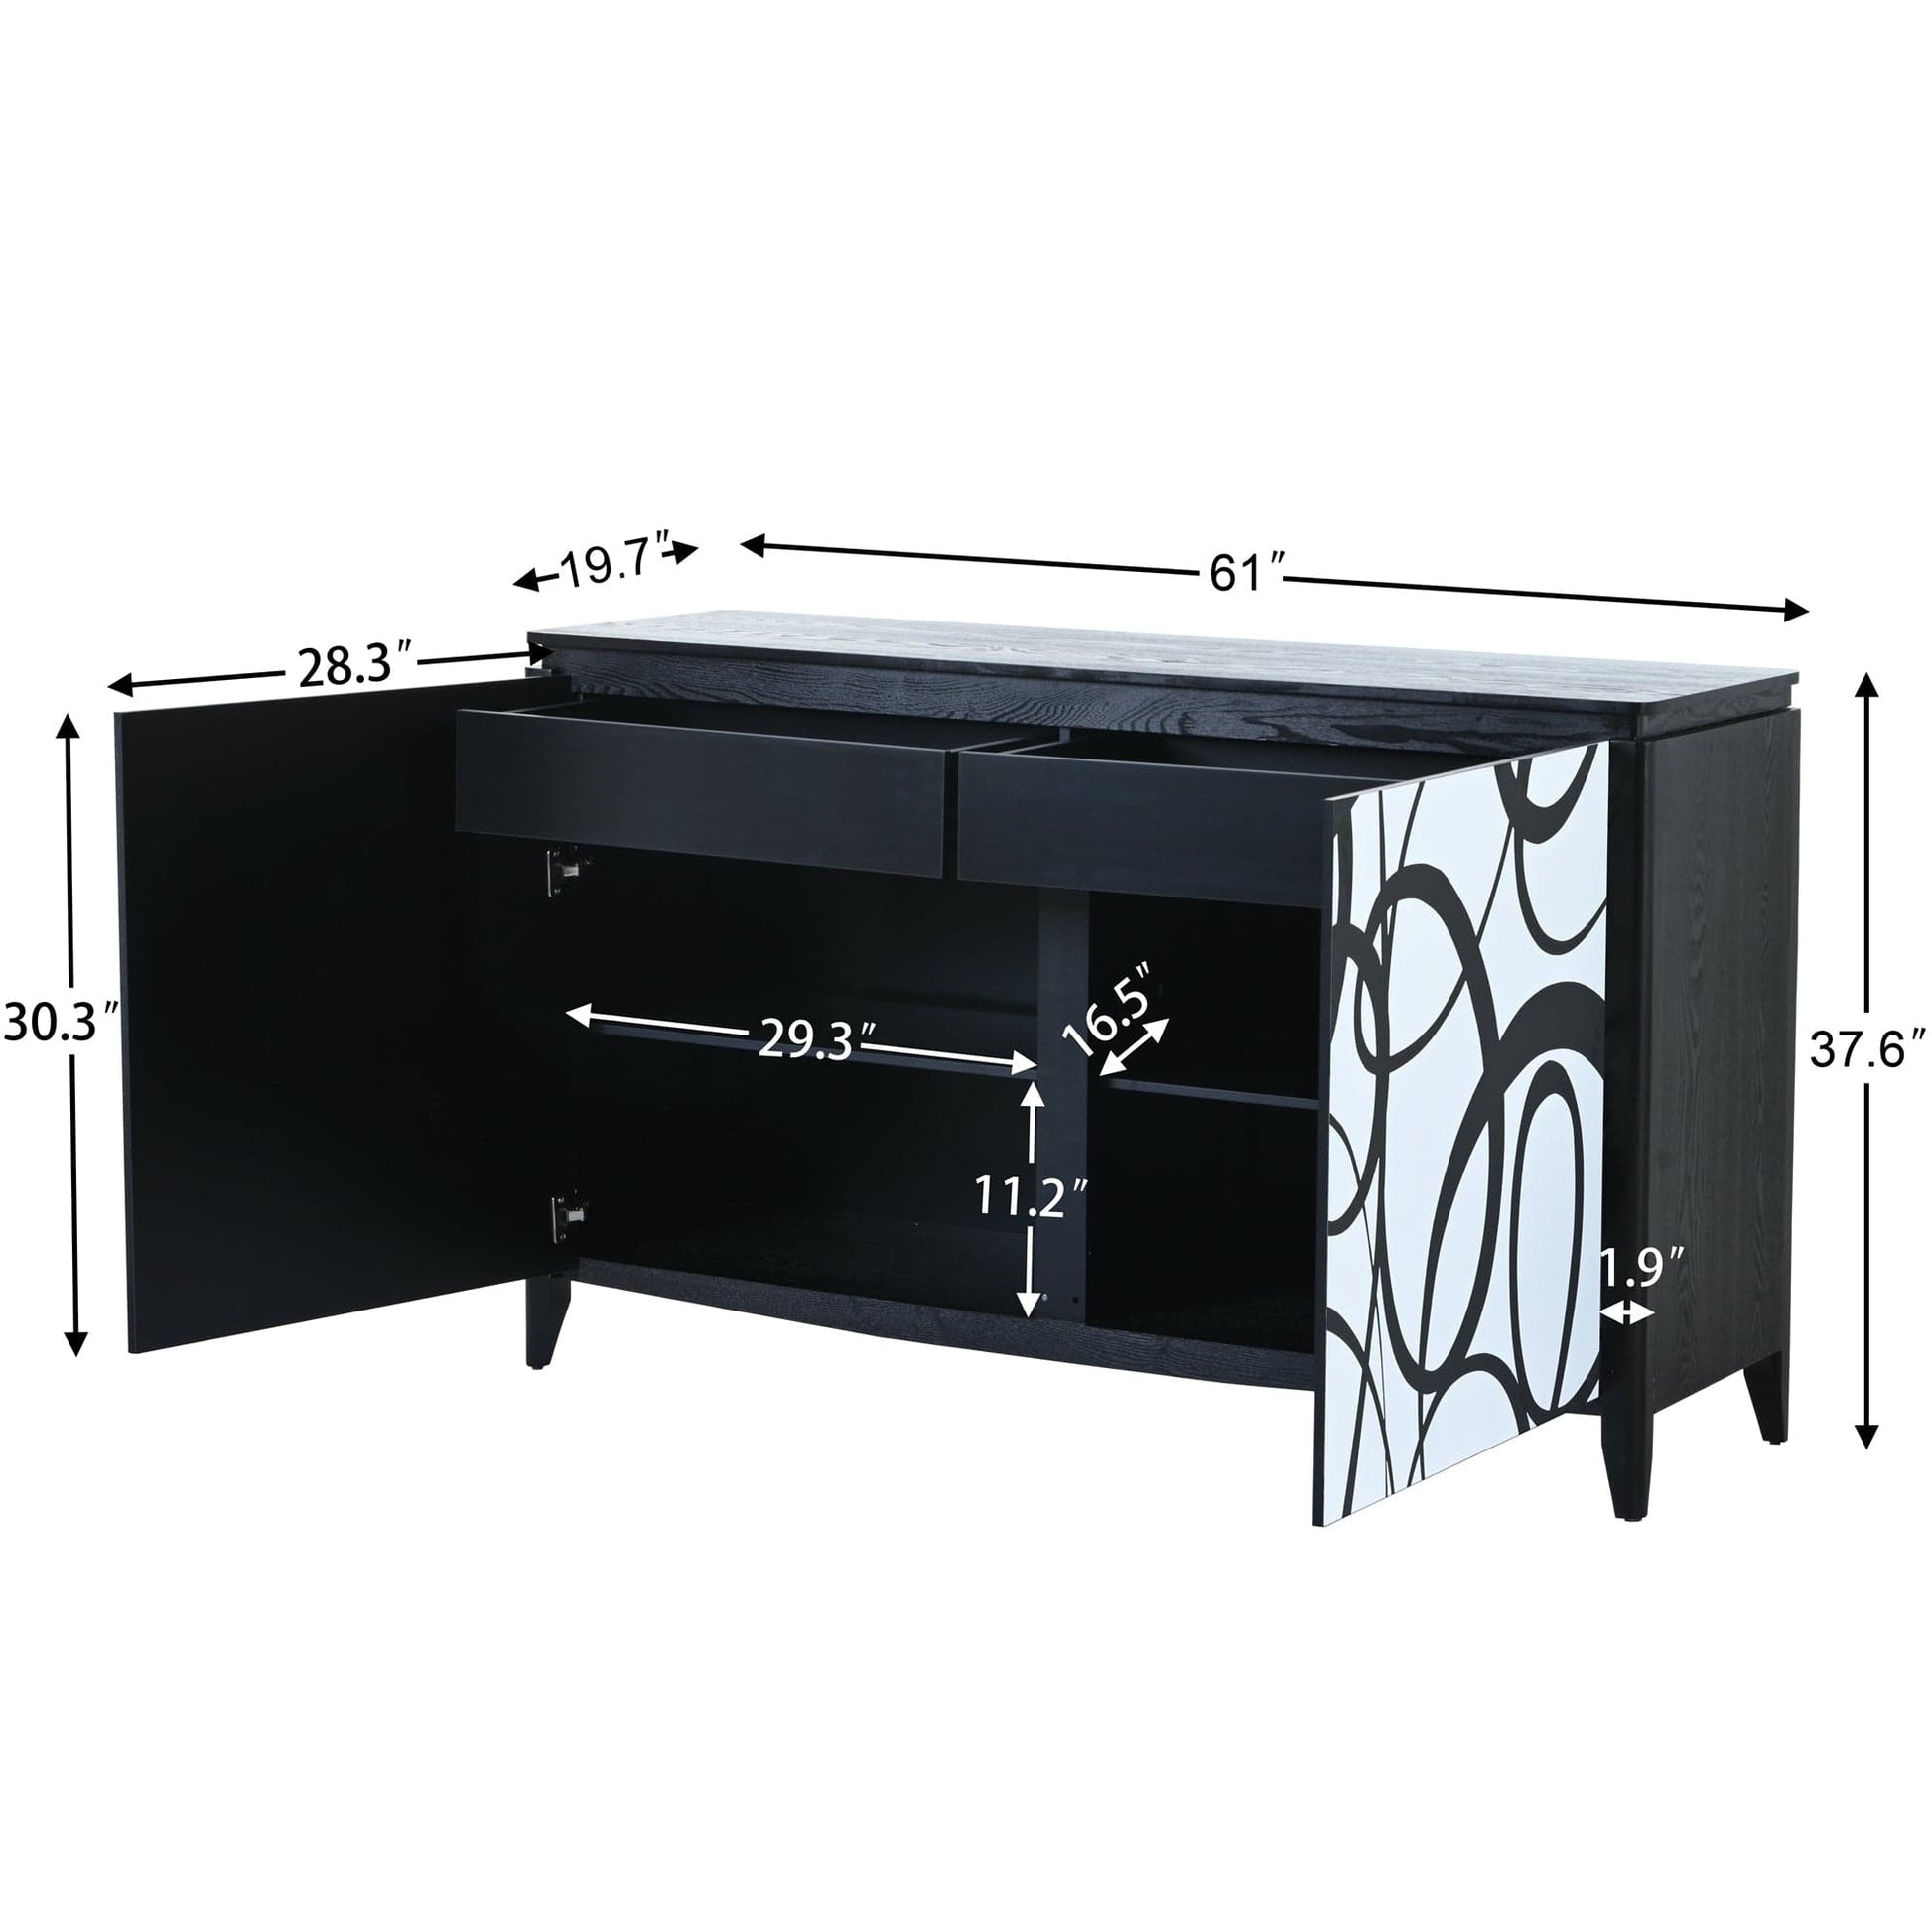 1st Choice Furniture Direct Sideboard Buffet 1st Choice Modern Sturdy Sideboard Buffet Storage Cabinet Solution